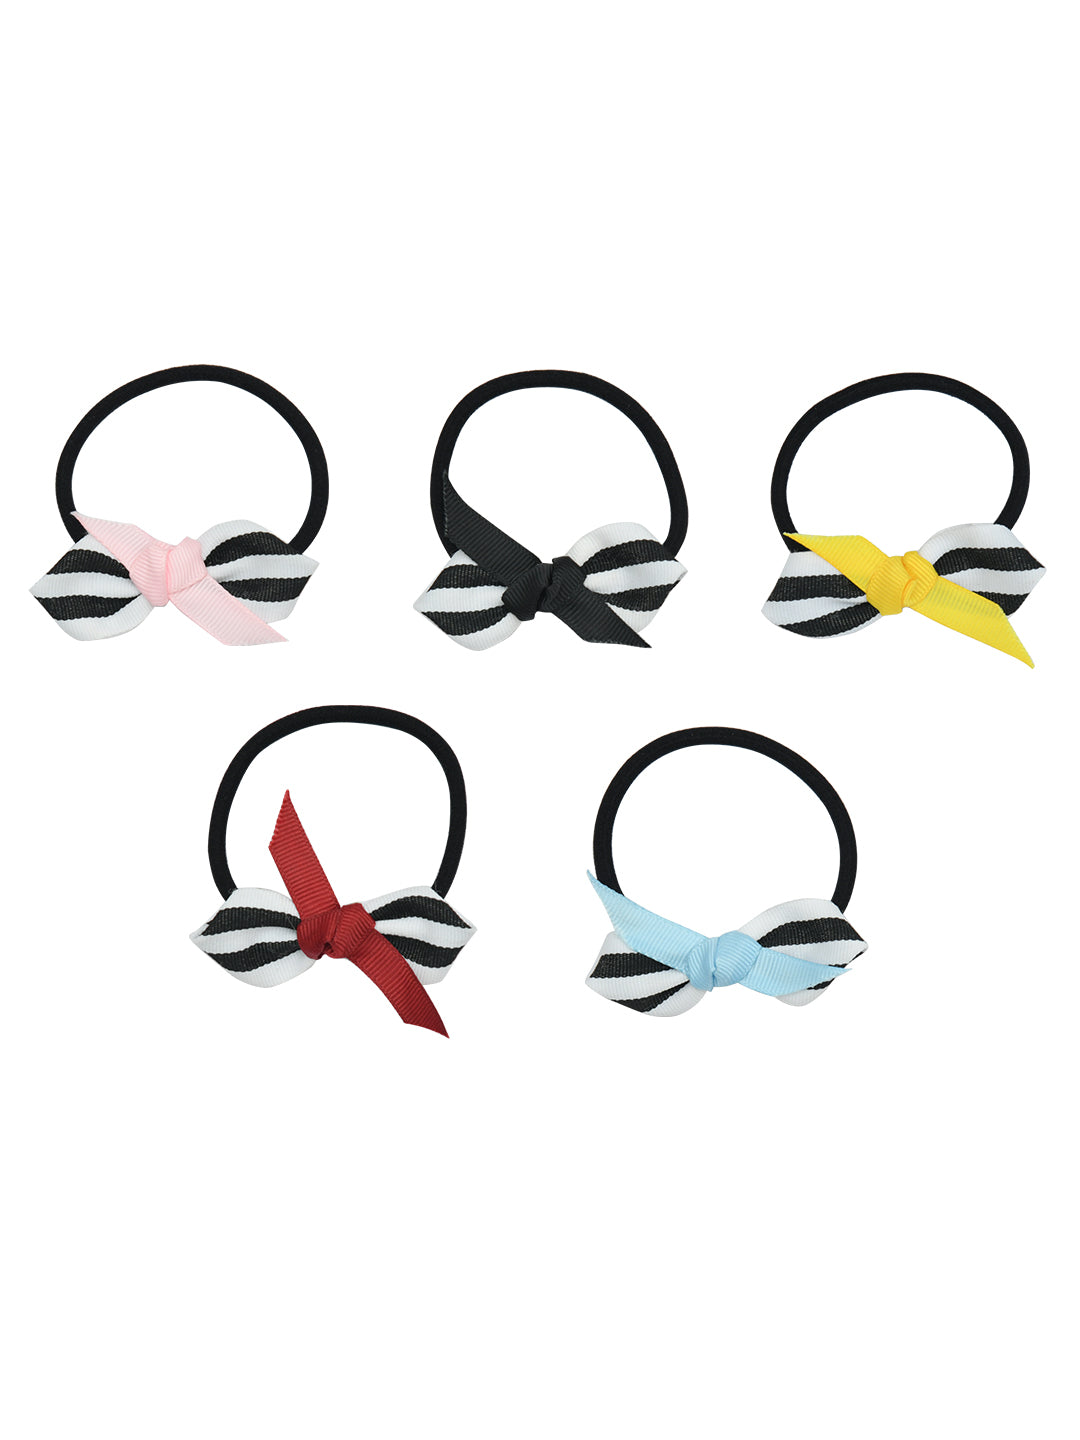 Set of 5 Bow Hair Ties for Girls